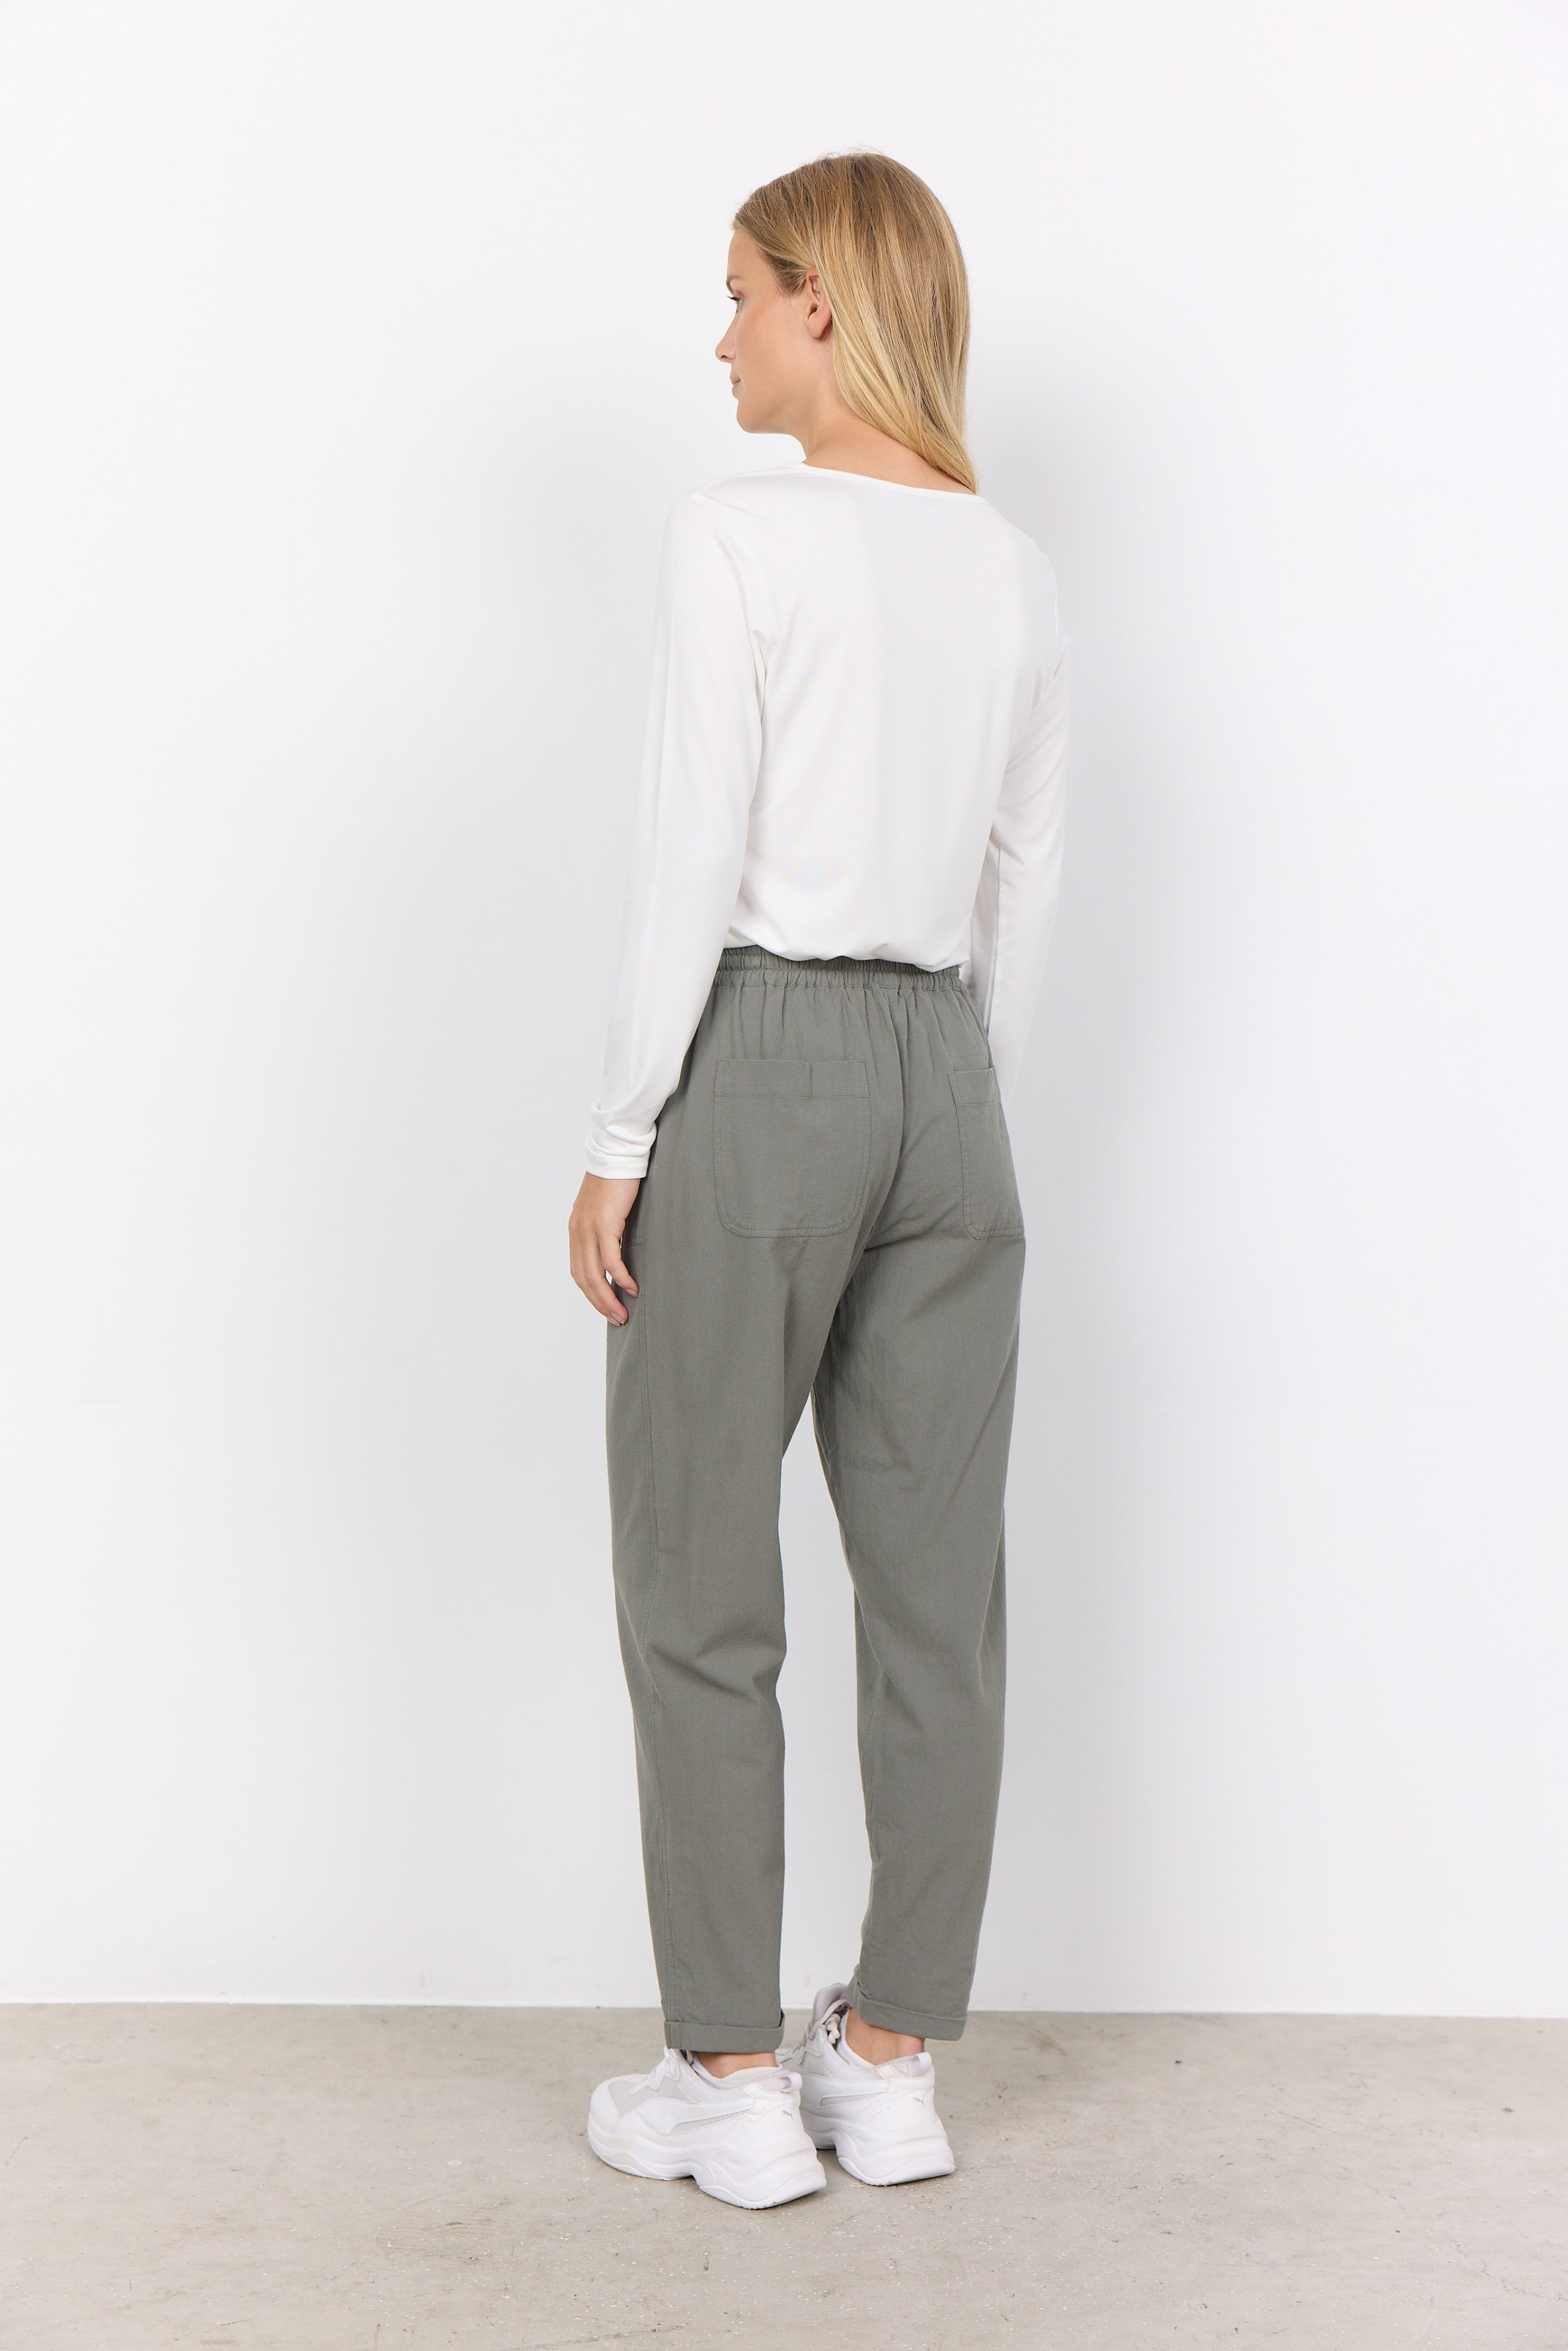 Back view of Soya Concept (17195) Women's Ankle Length, Pull On Textured Cotton Pants in Misty Green